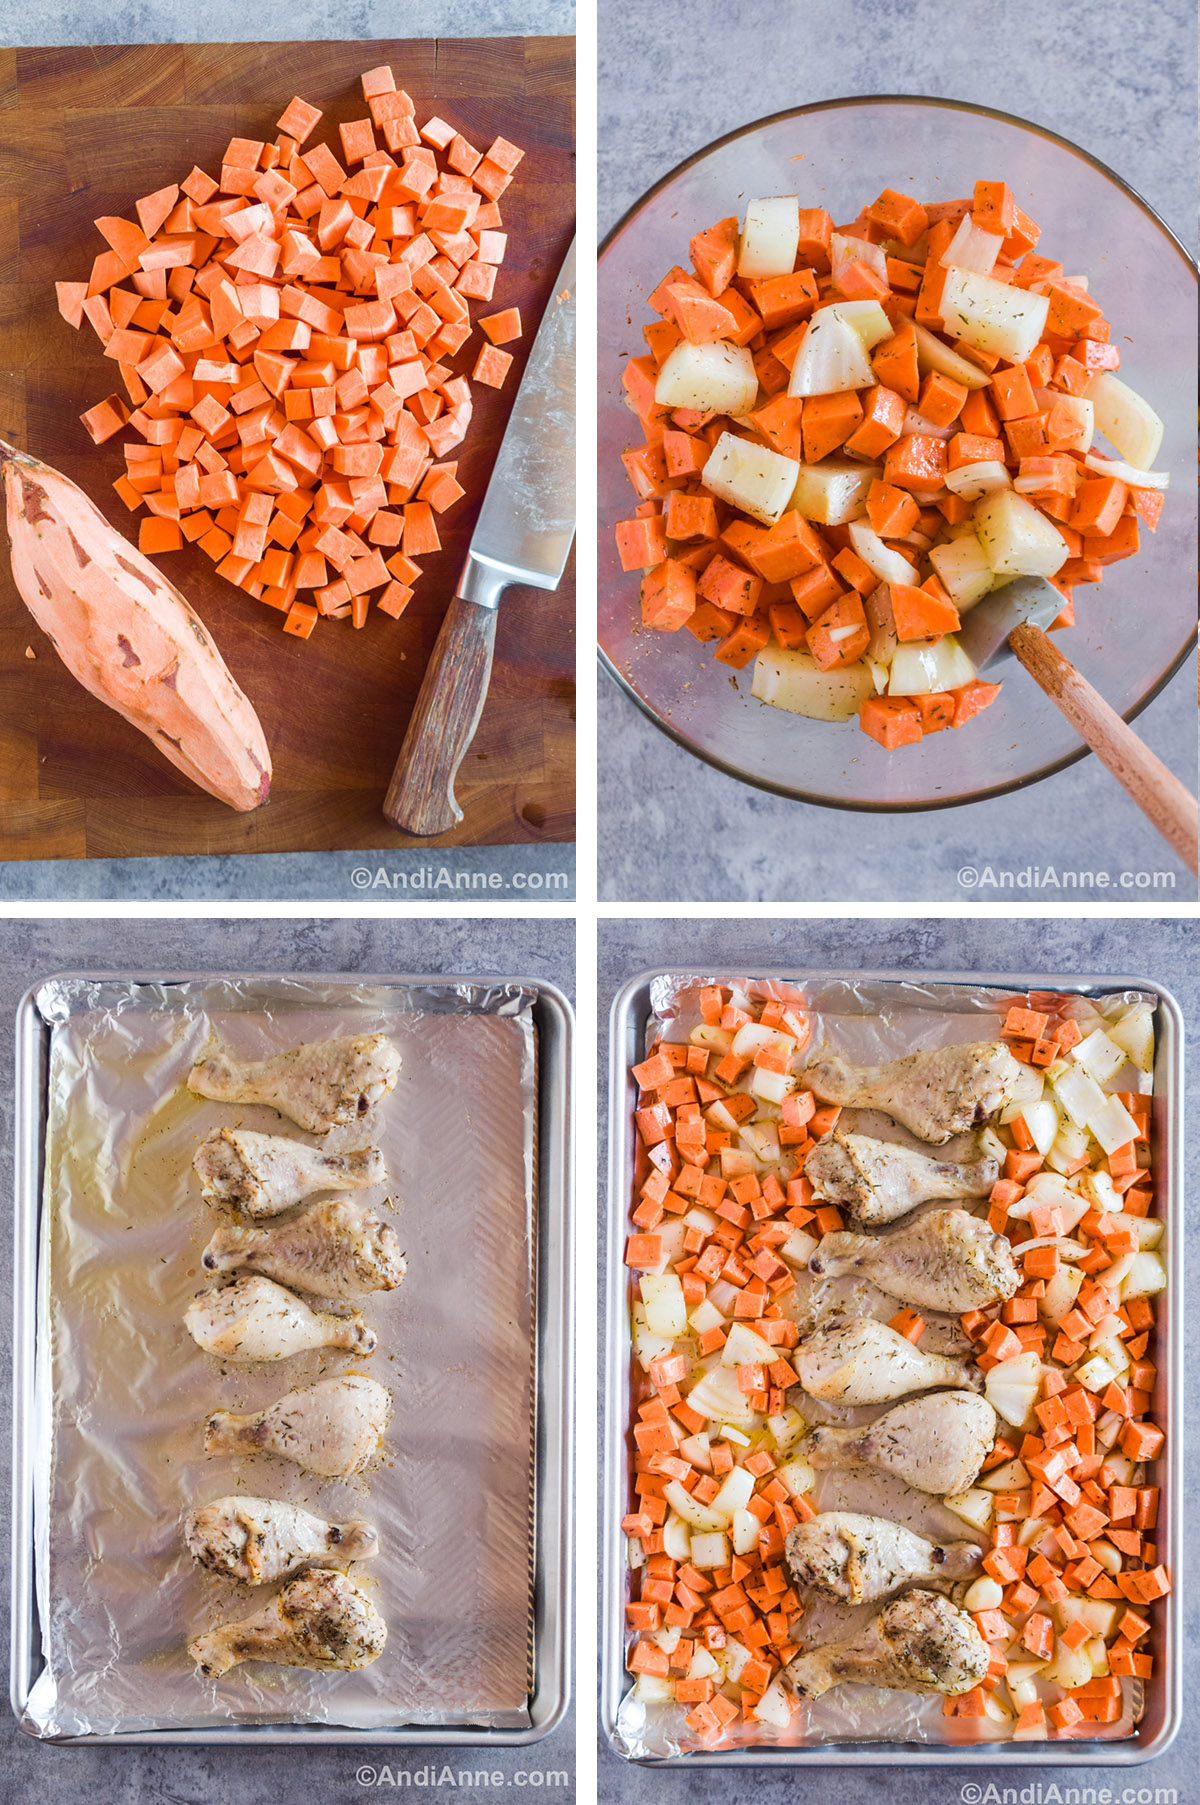 Four images showing steps to make the recipe. First is chopped sweet potato and a peeled one on cutting board. Second is chopped sweet potato with onion in a bowl tossed with olive oil, salt and pepper. Third is chicken legs in the center of a baking sheet. Fourth is half cooked chicken legs in the center of a baking sheet with chopped sweet potato and onion surrounding it.